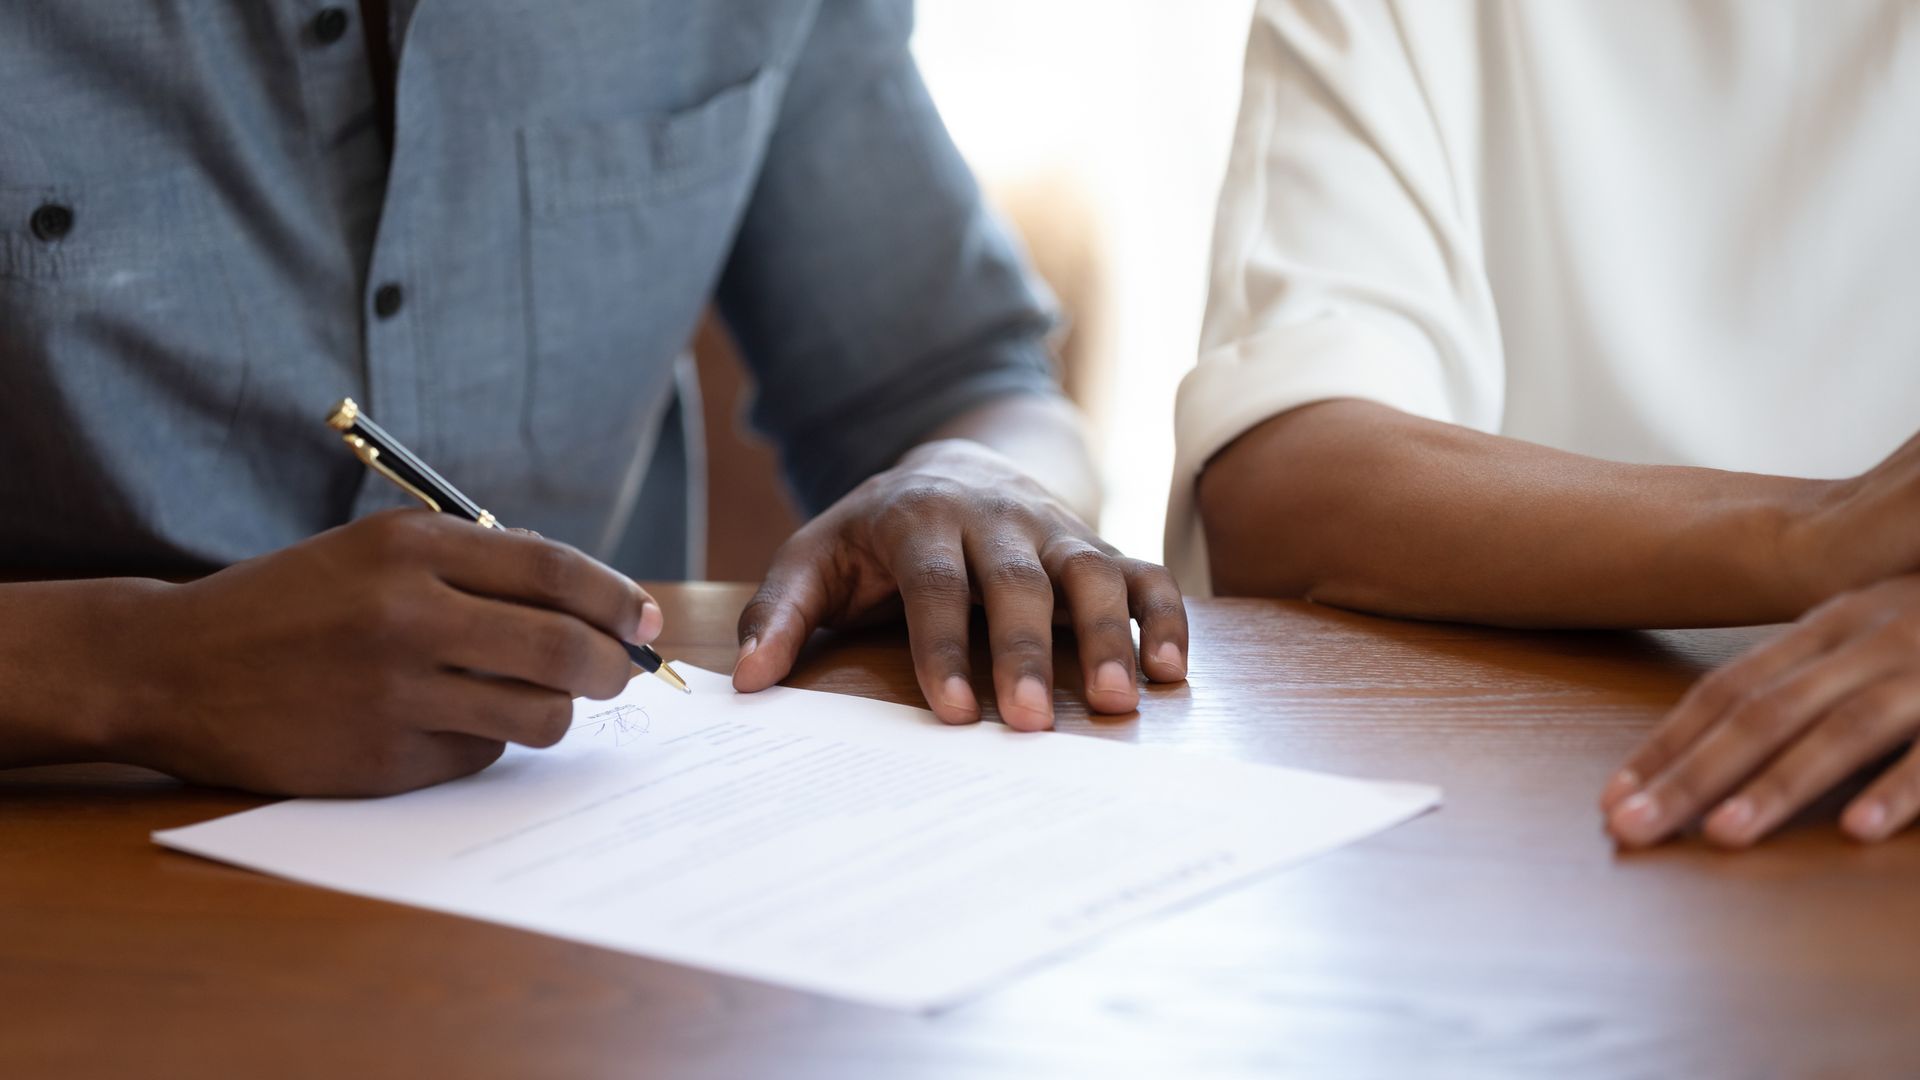 A man and a woman are sitting at a table signing a document.